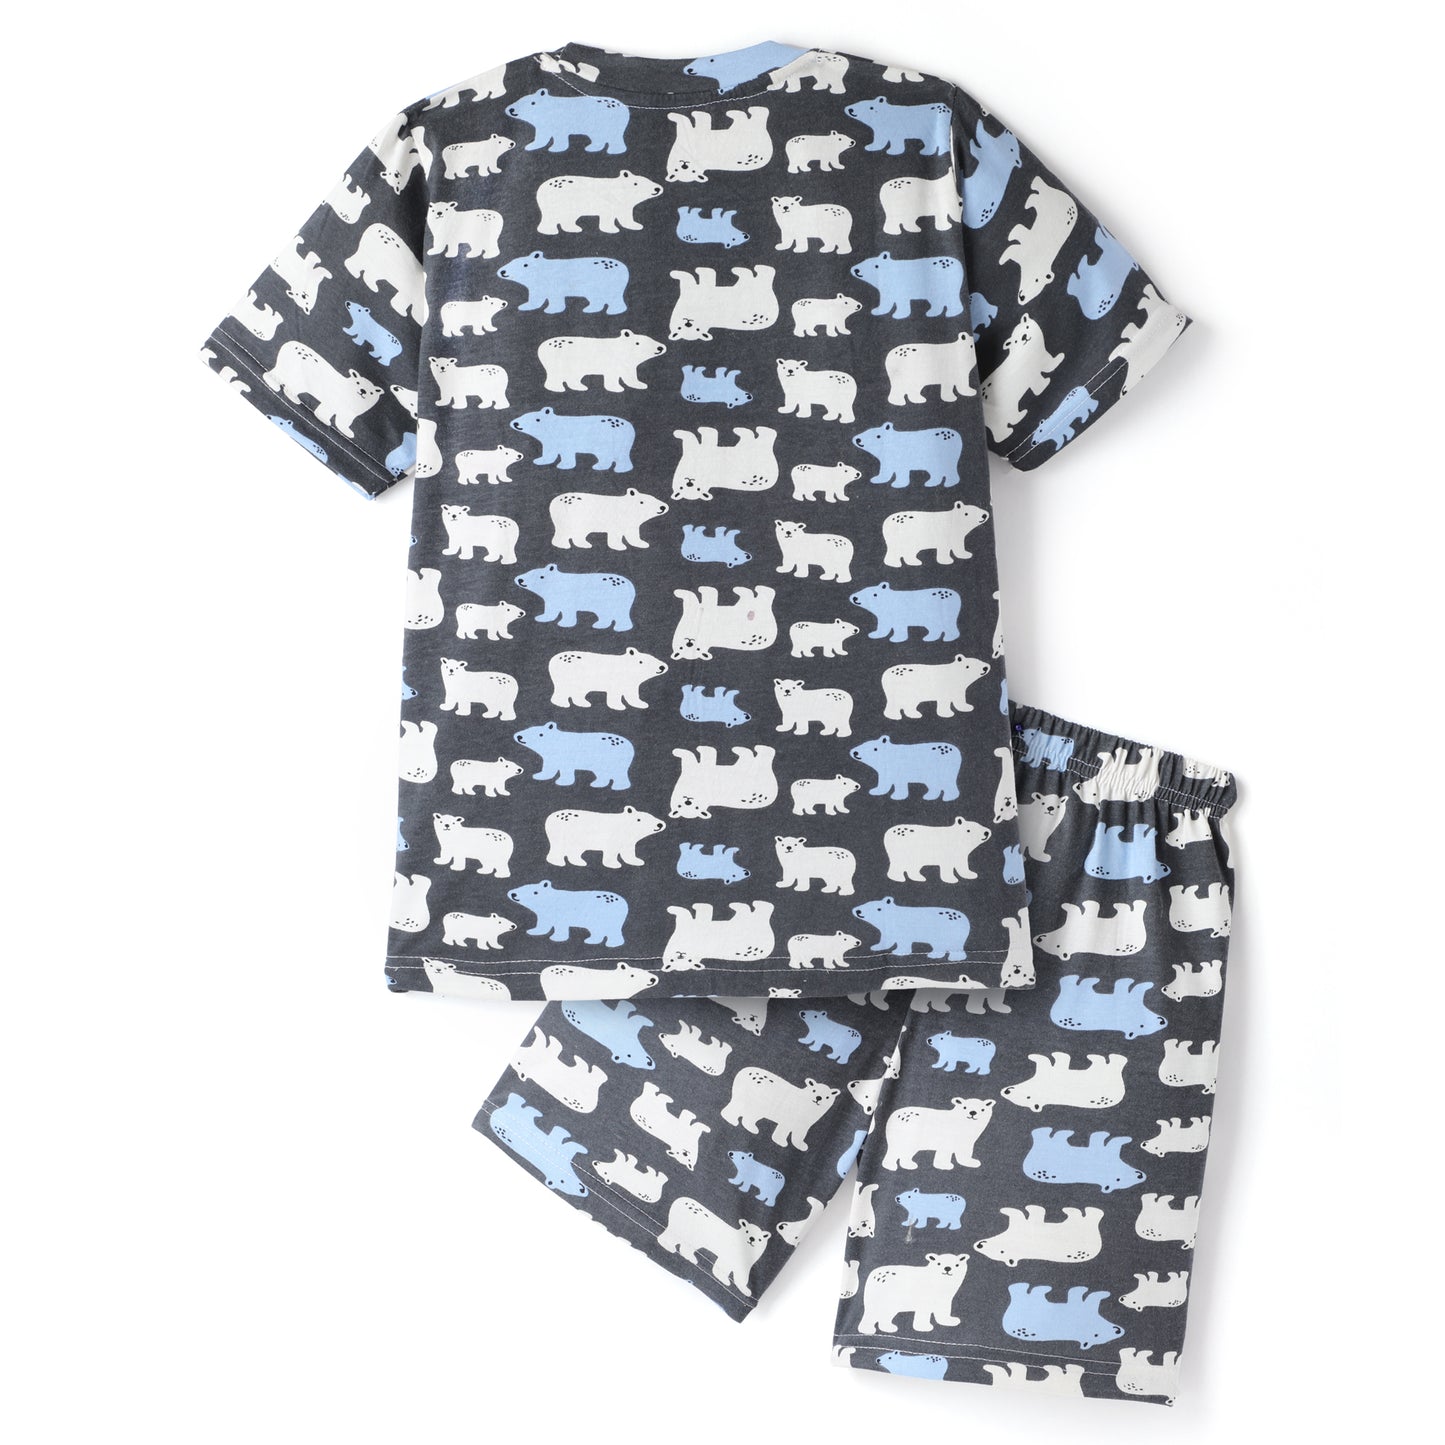 Blue & Brown Pure Cotton Half Sleeves Animal Printed Shorts Set for Boys - Pack of 2